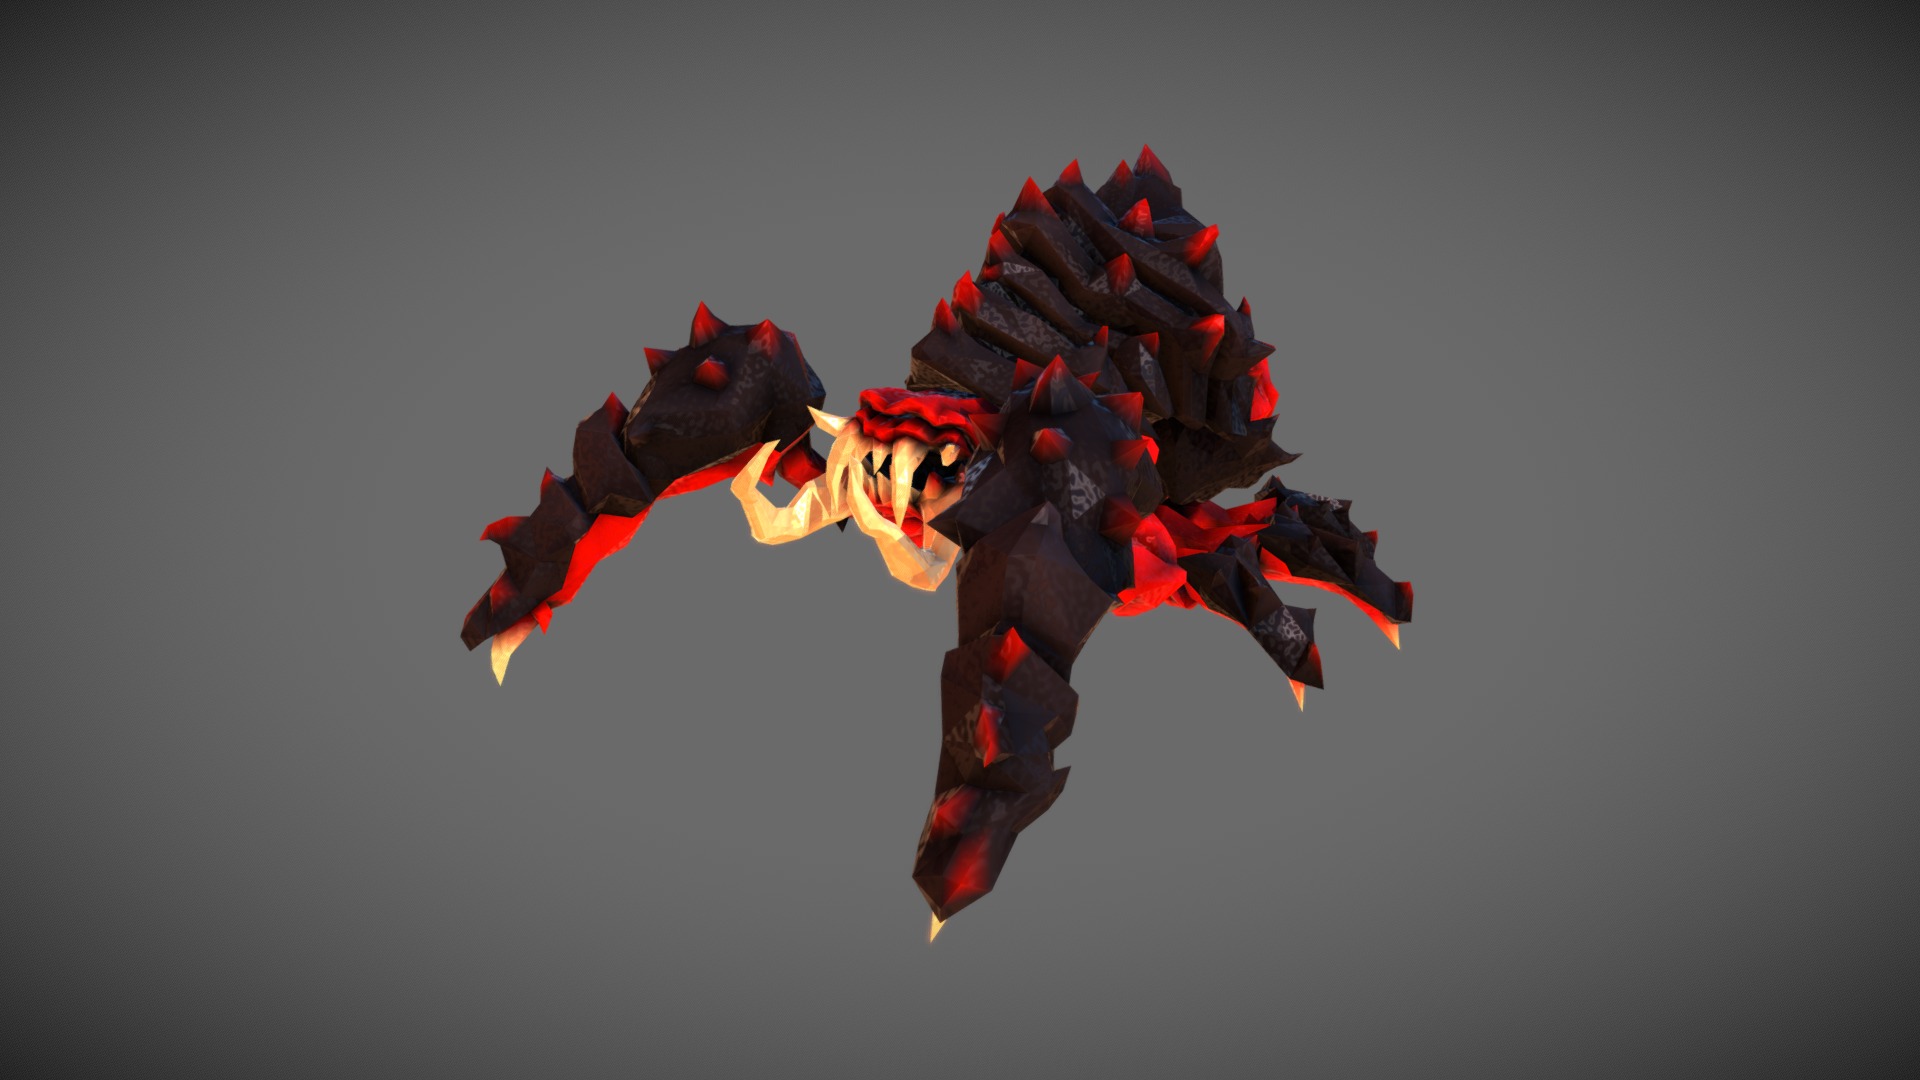 Dreadnought made for Deep Rock Galactic, My design, no textures are used in DRG only vertex colors and shaders. DRG only uses textures for effect like, roughness or specular 3d model